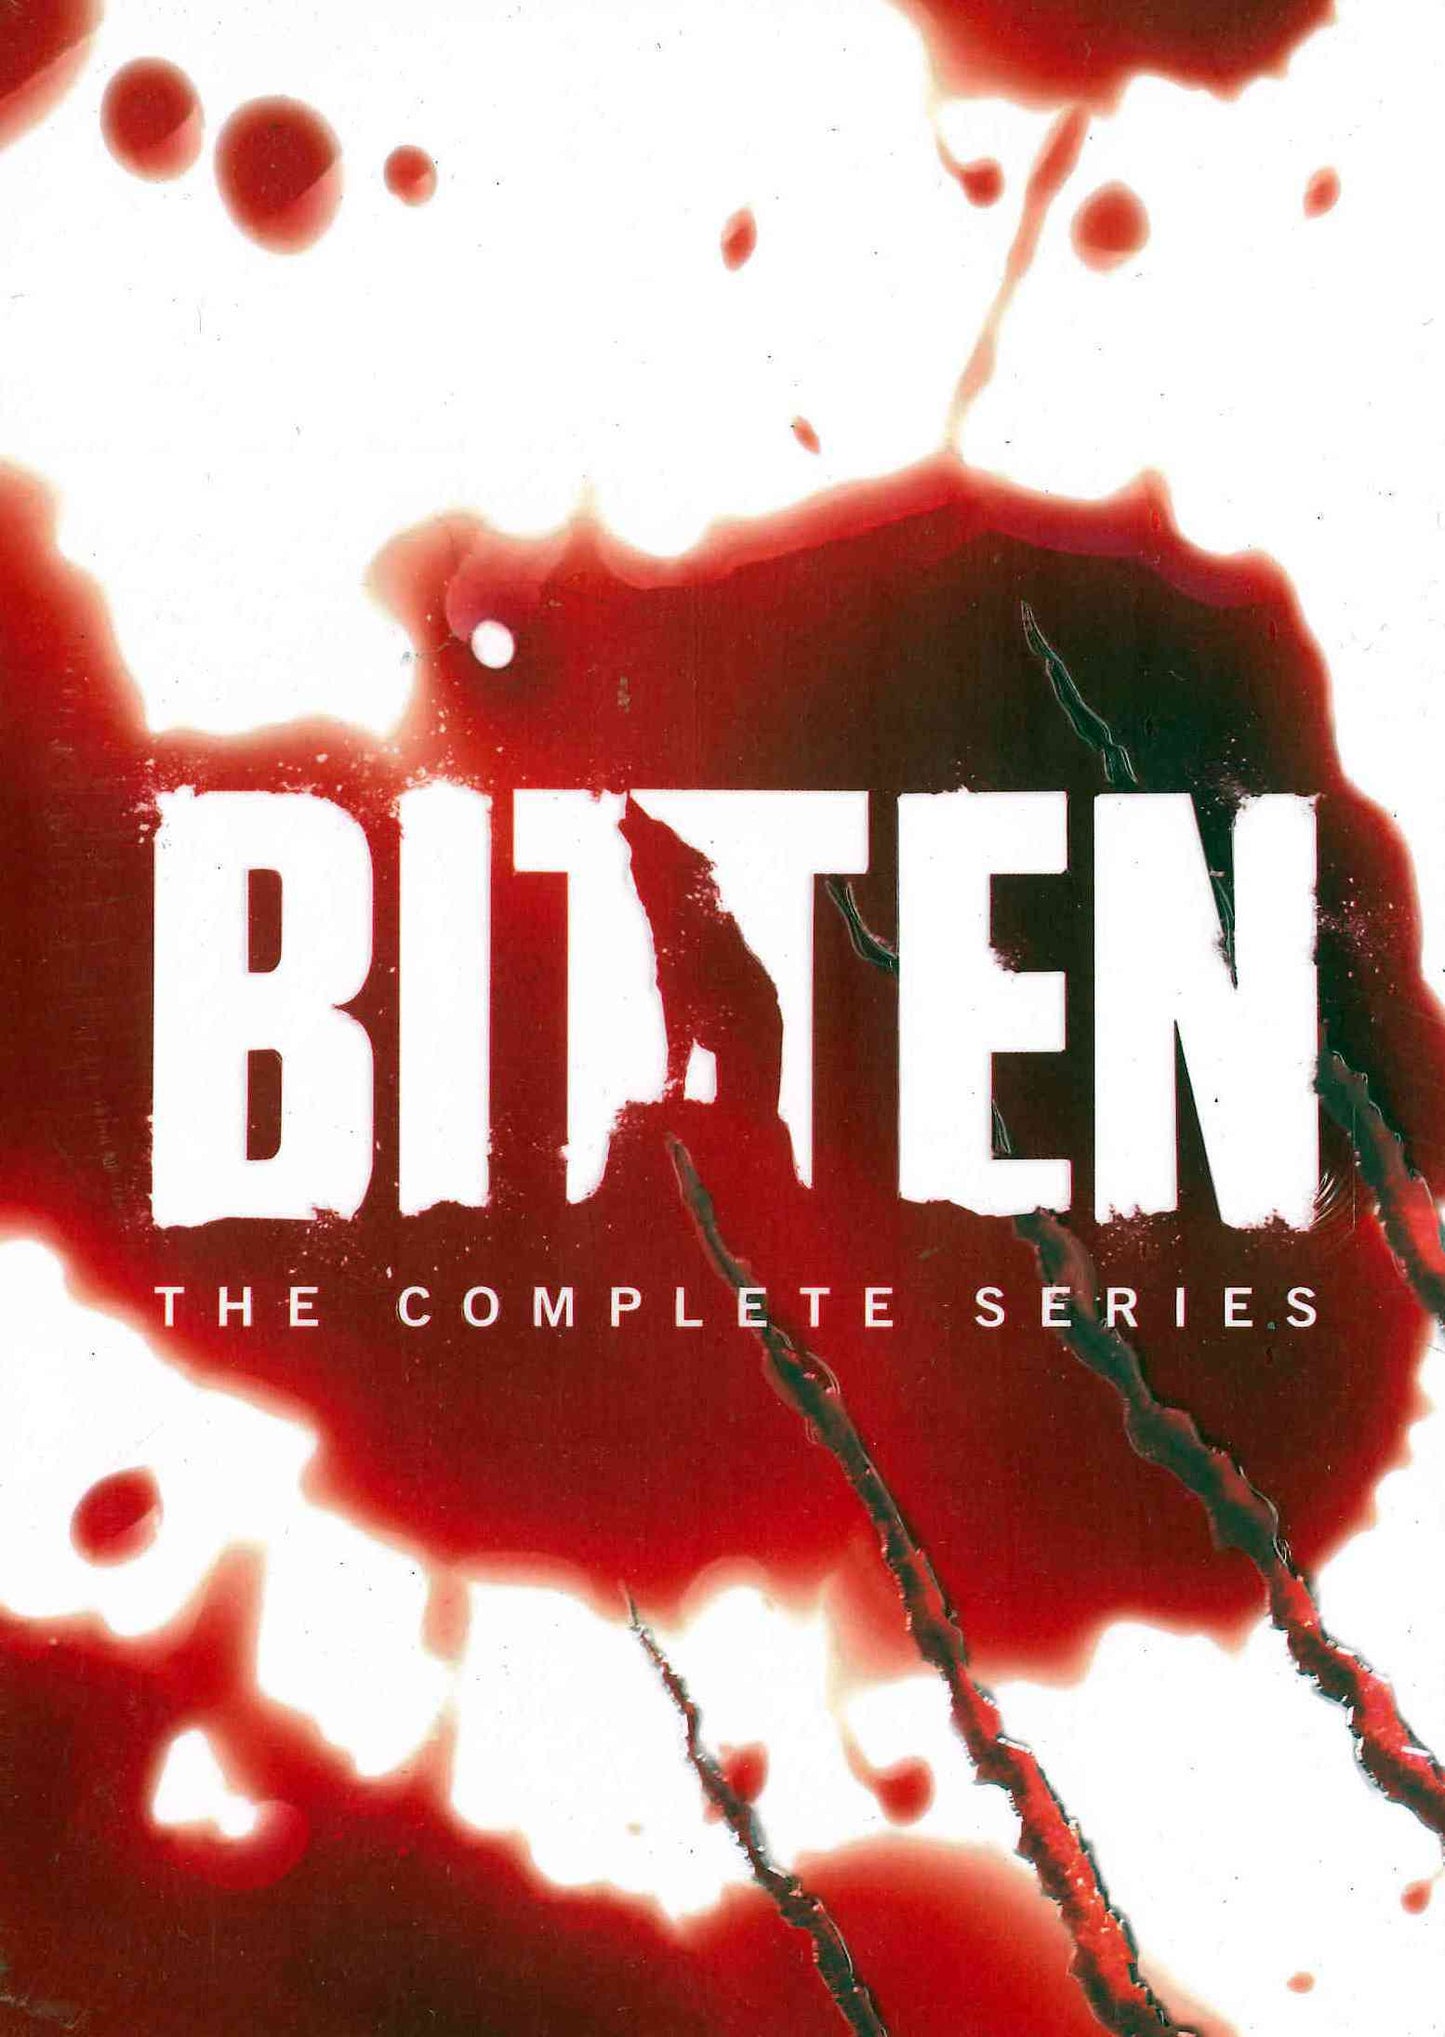 Bitten: The Complete Series cover art